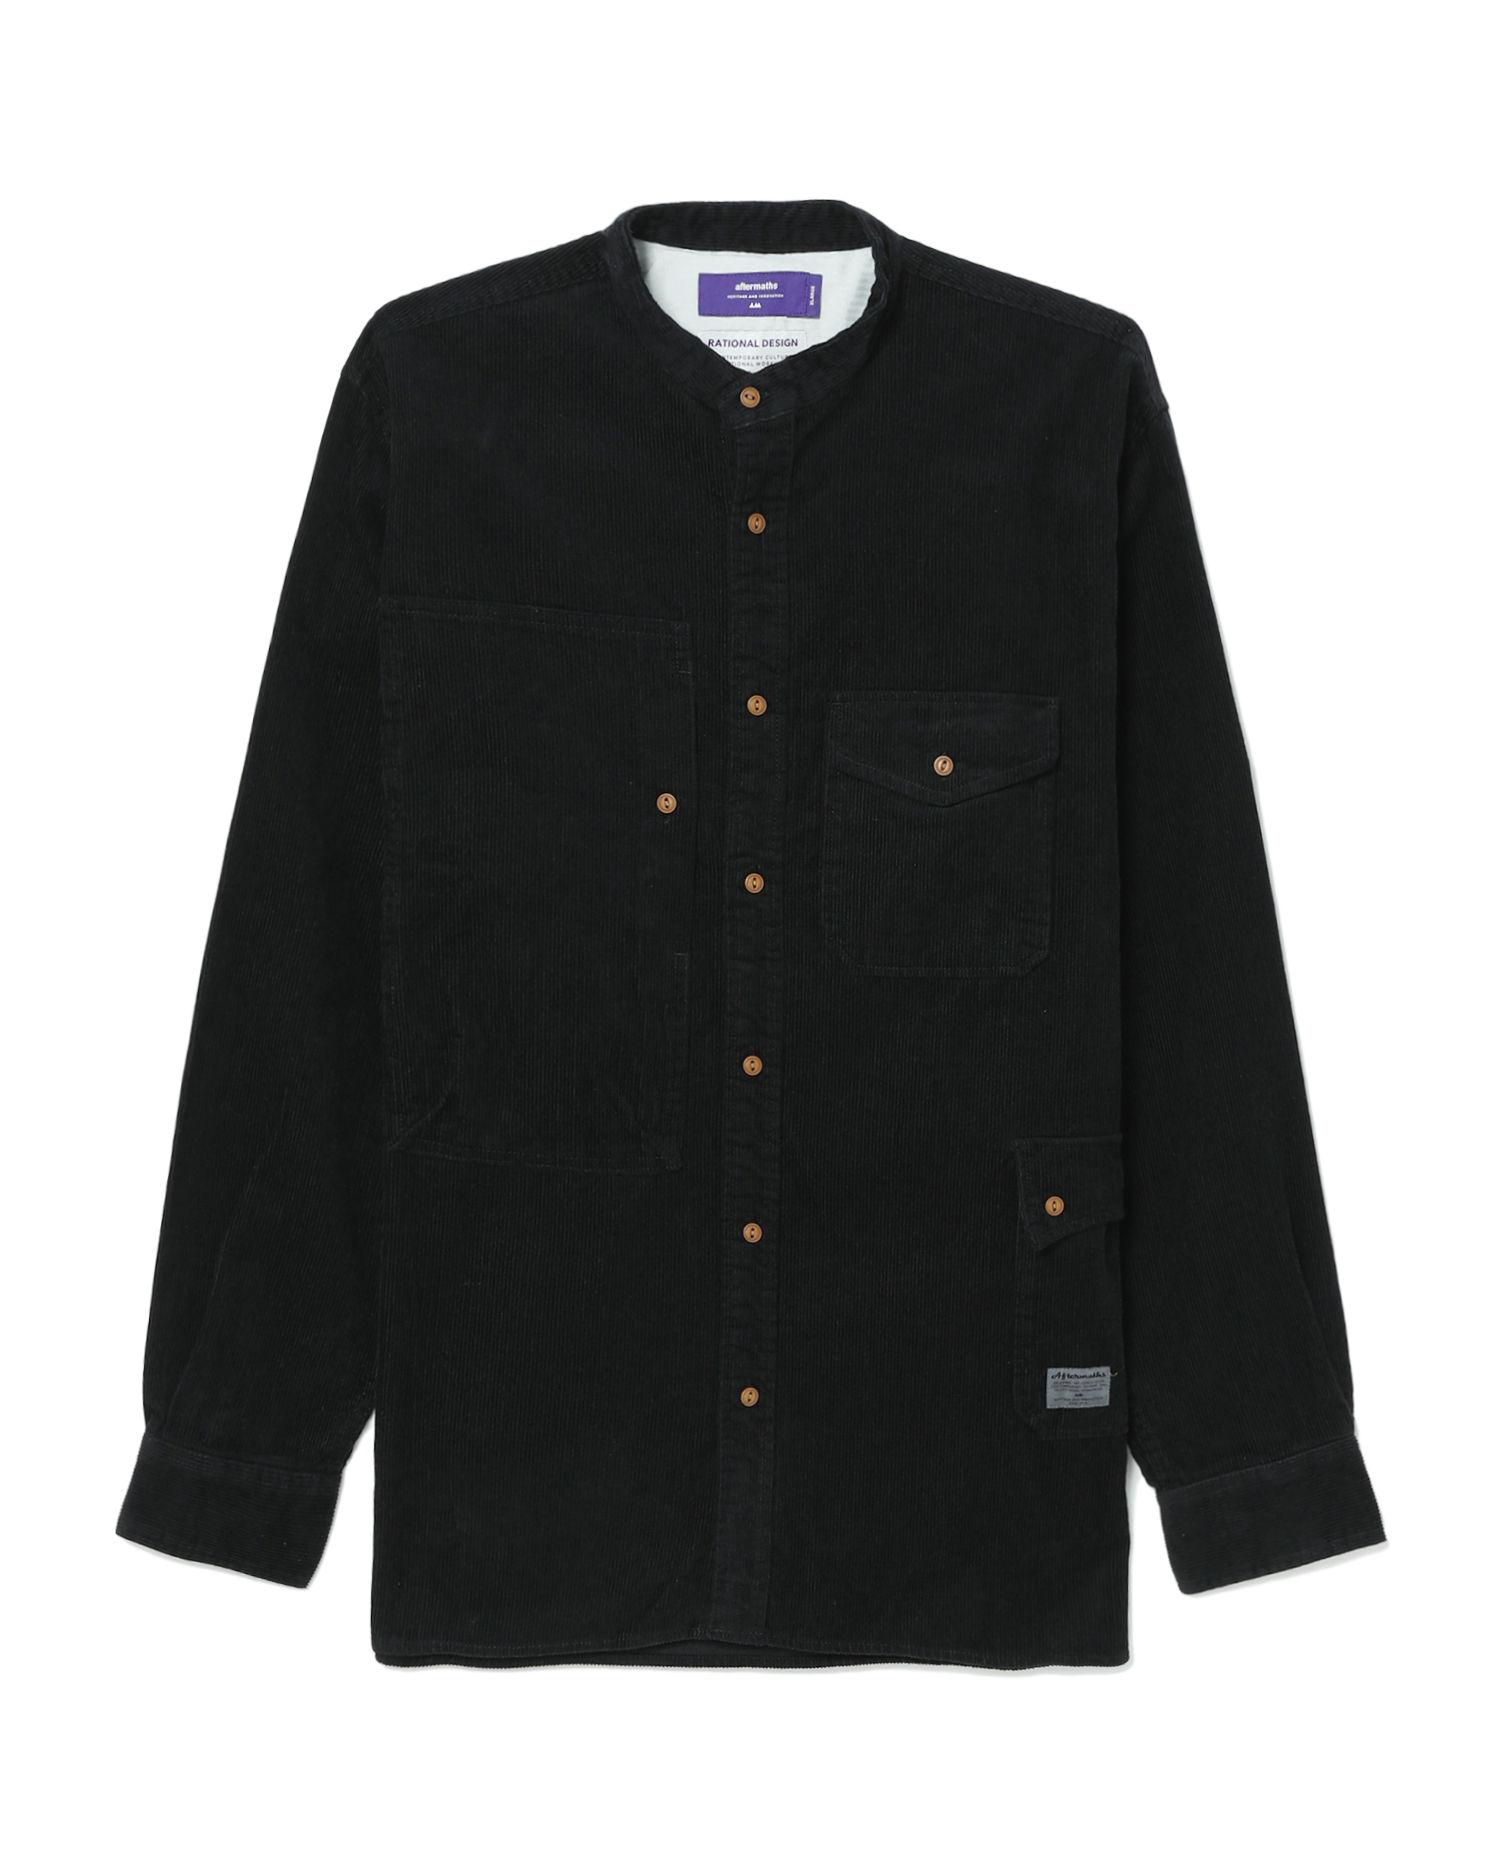 Corduroy long sleeve shirt by AFTERMATHS